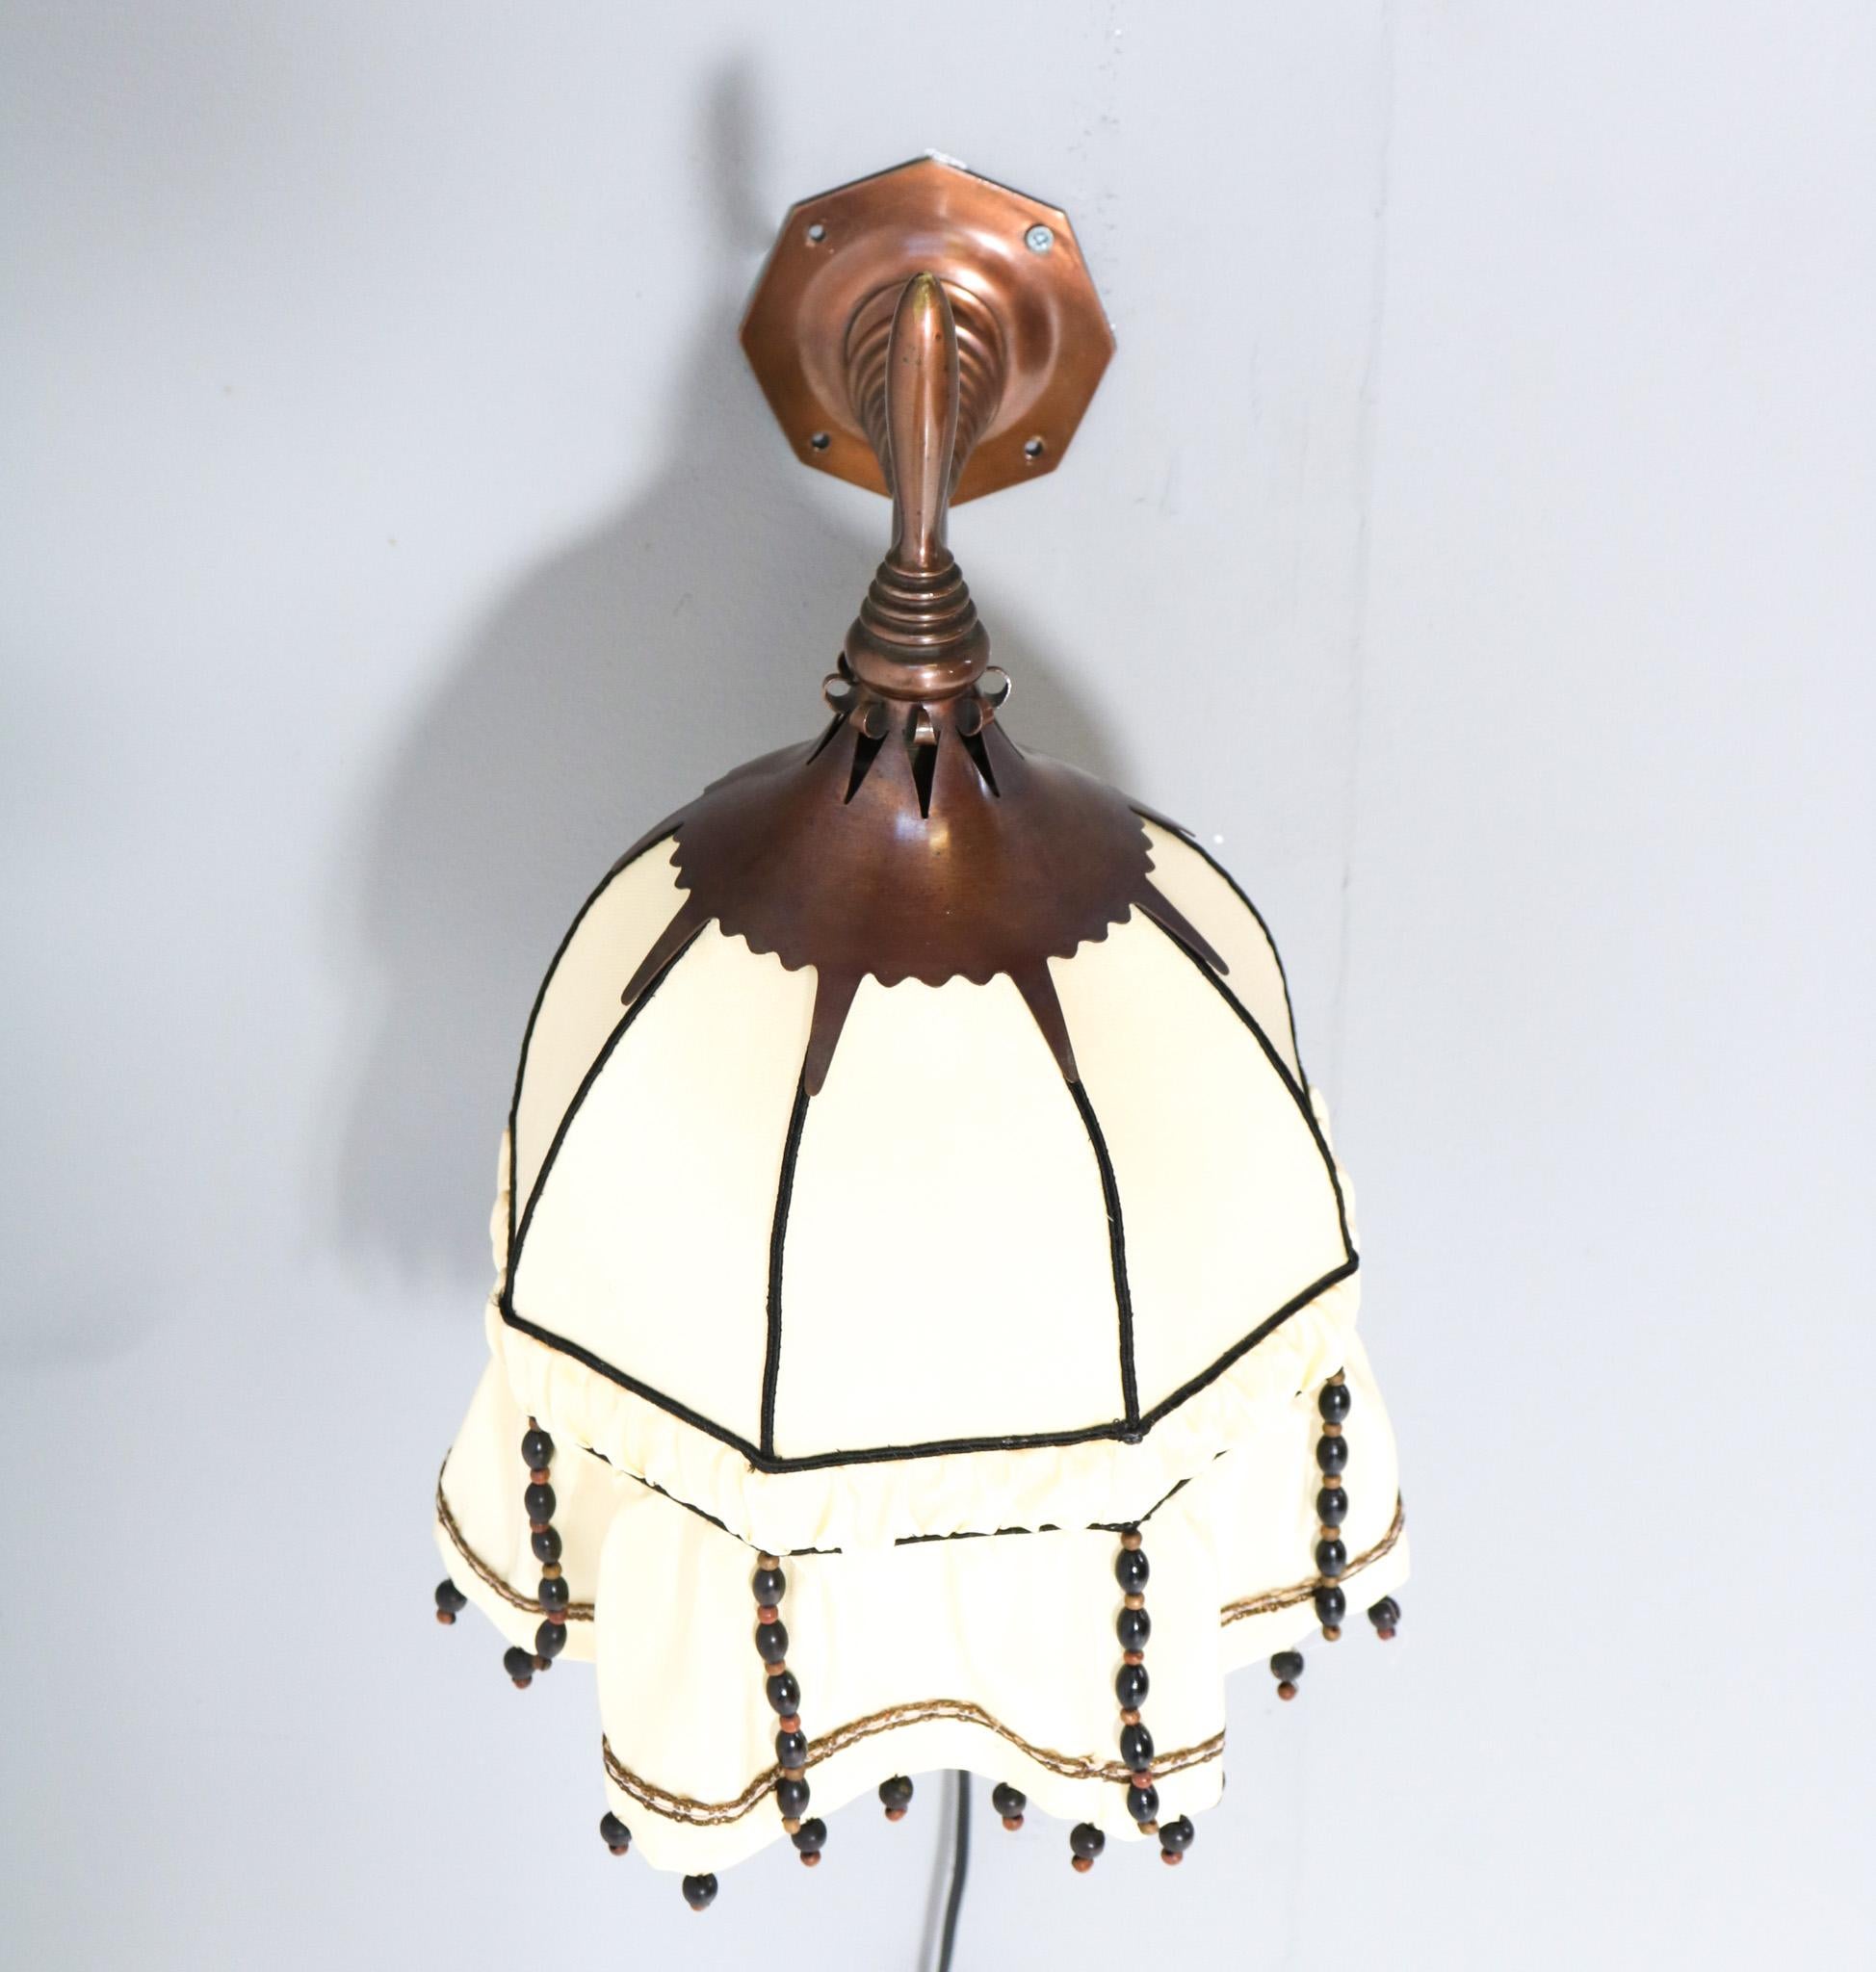 Dutch Patinated Copper Art Deco Amsterdamse School Wall Light by Willem Kromhout For Sale